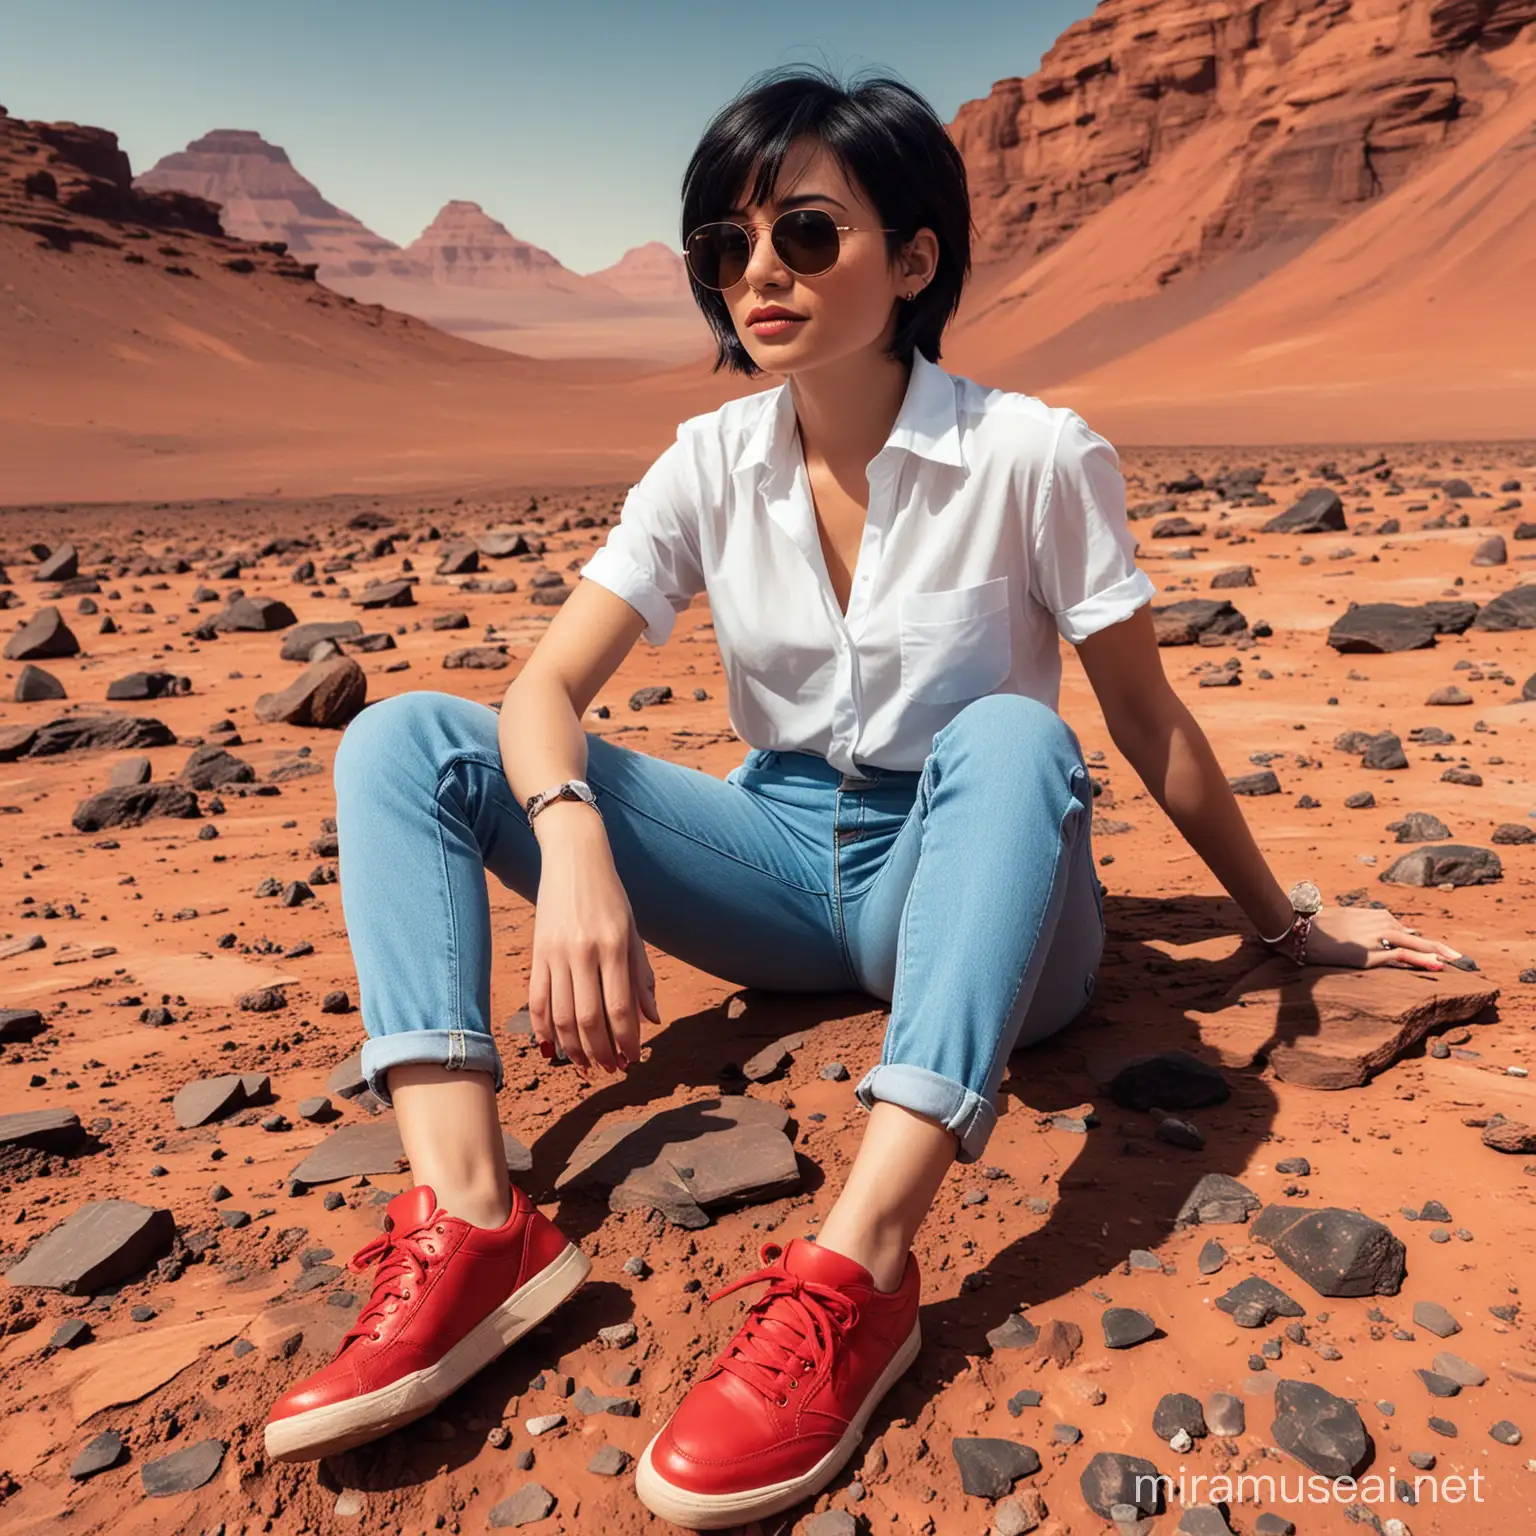 Woman with Short Black Hair and Sunglasses Sitting on Mars